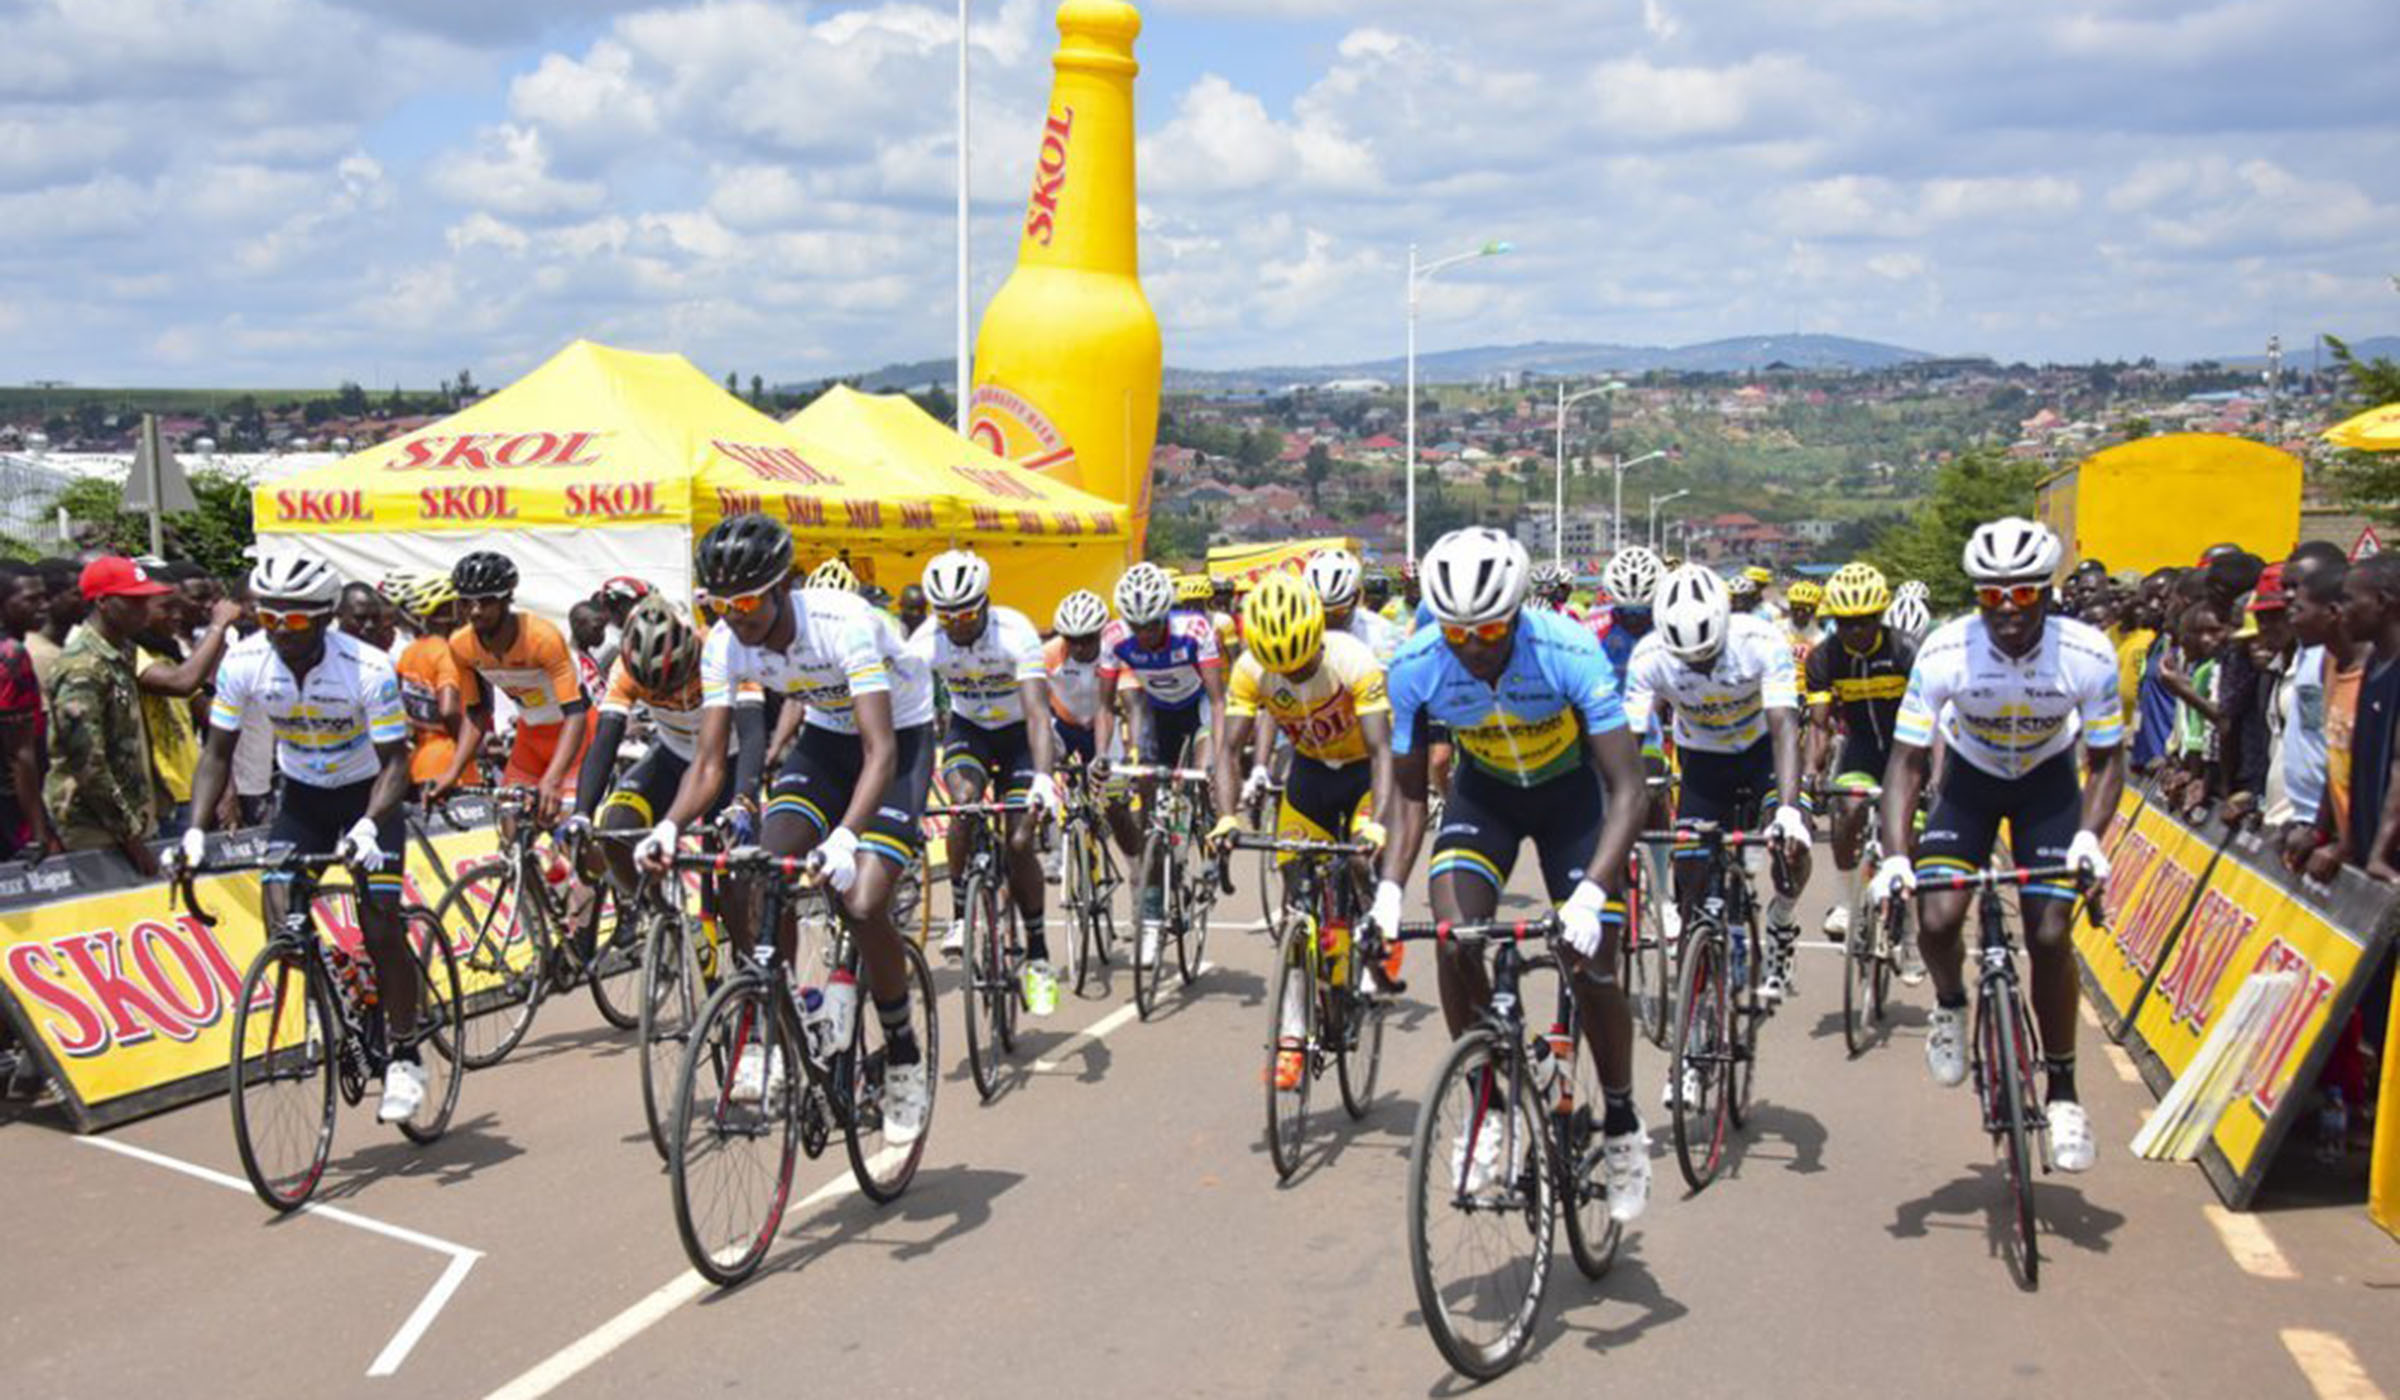 Riders at the starting line at the Skol sponsored tournament held in the Special Economic Zone in Masoro. Courtesy